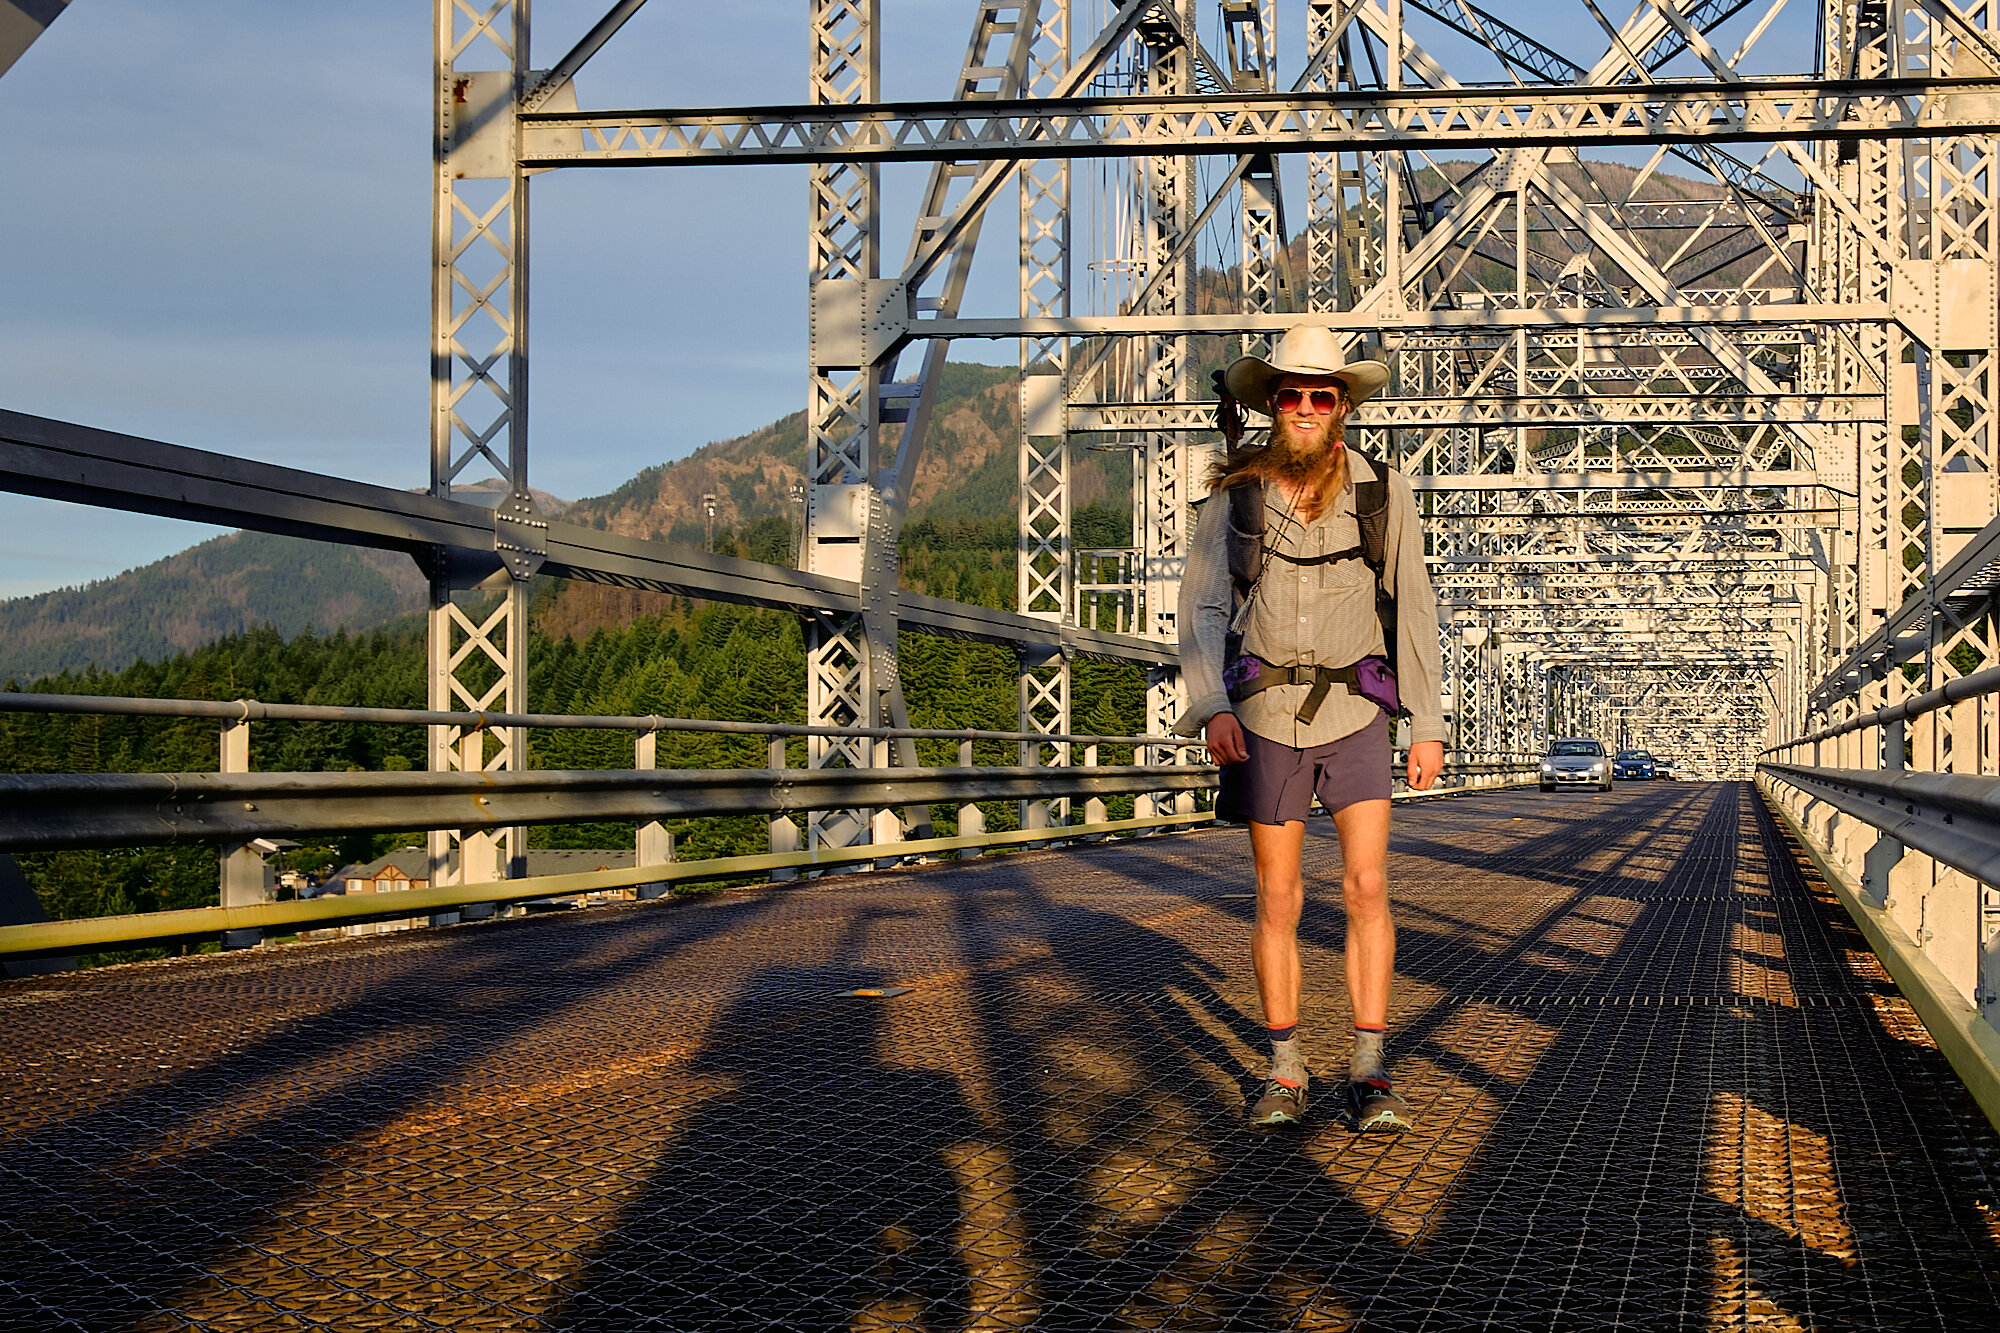  Walking into Washington across the Bridge of the Gods over the Columbia river. The bridge is also the lowest point on the PCT at 151 feet. | 9/12/19 Mile 2,146.9, 151' 